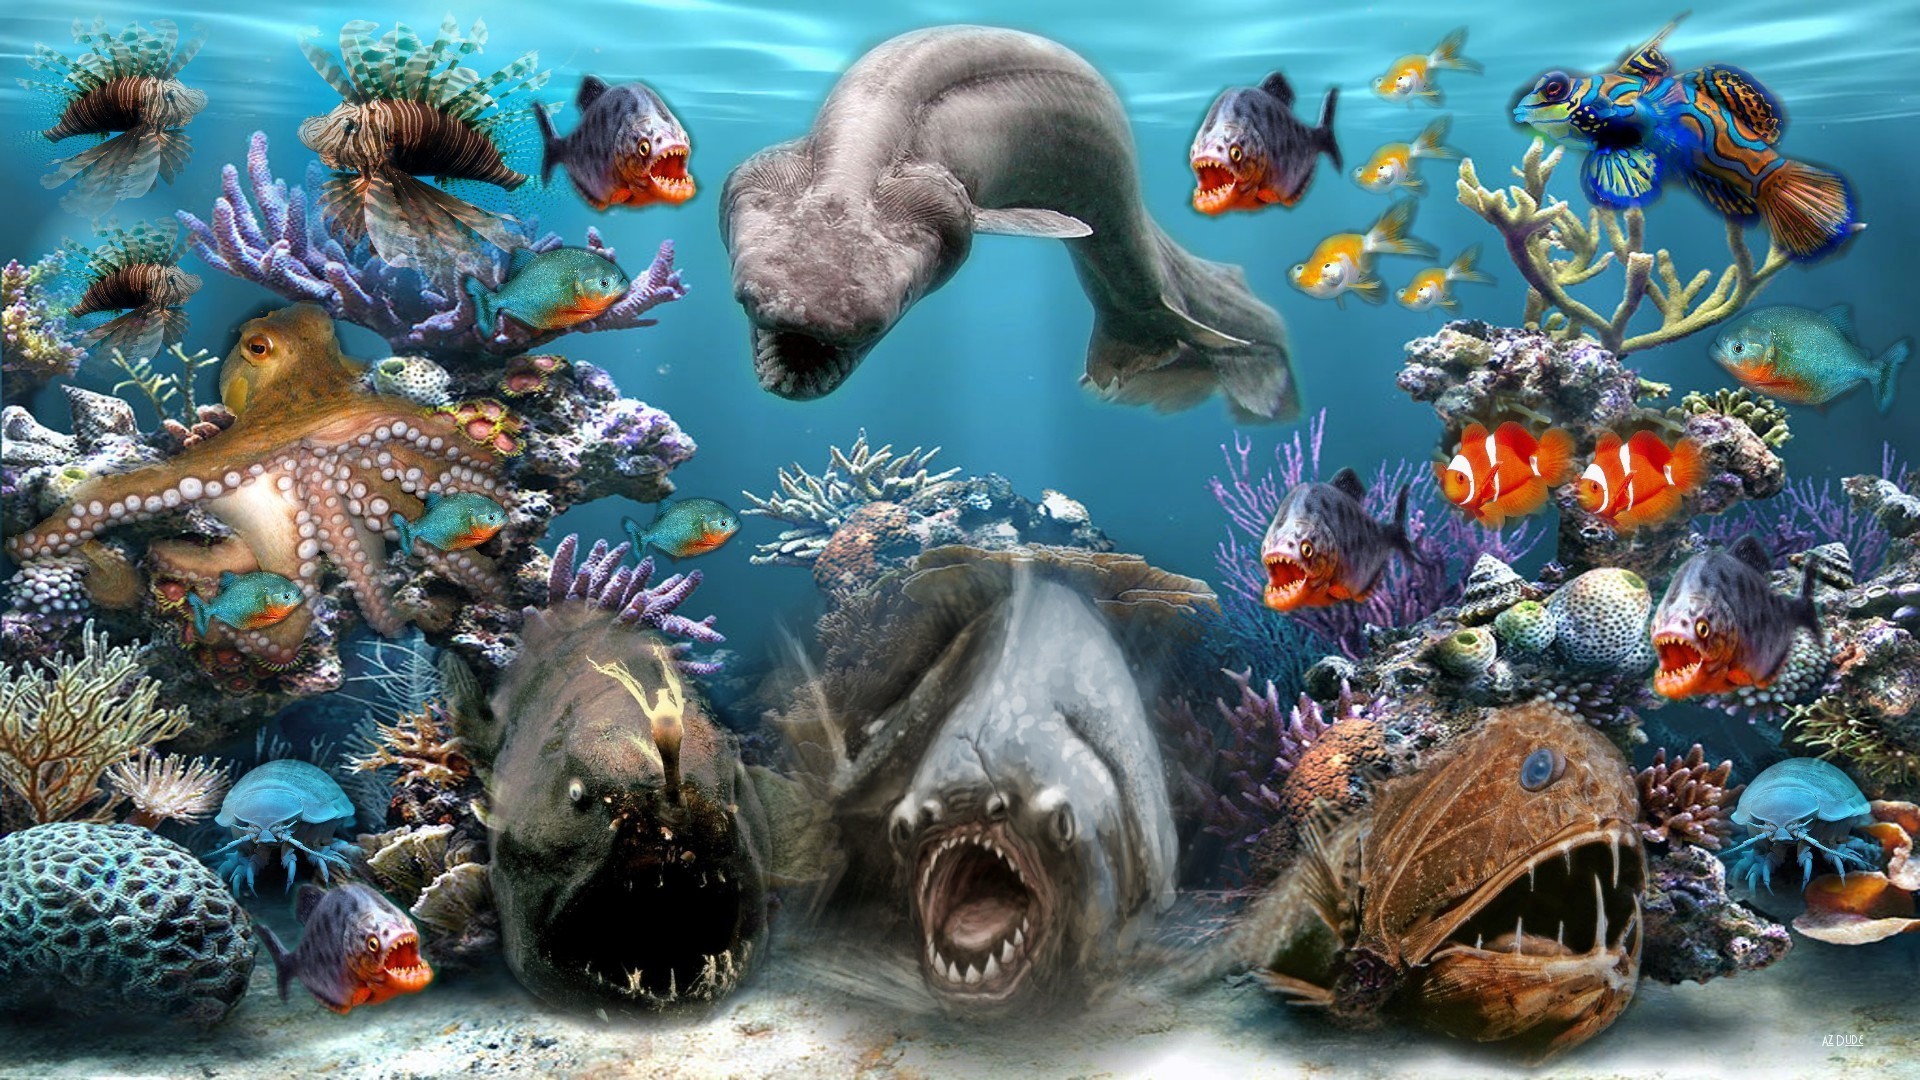 1920x1080 You can download Sea Creature Hd Wallpapers here. Sea Creature Hd Wallpapers  In High Resolution